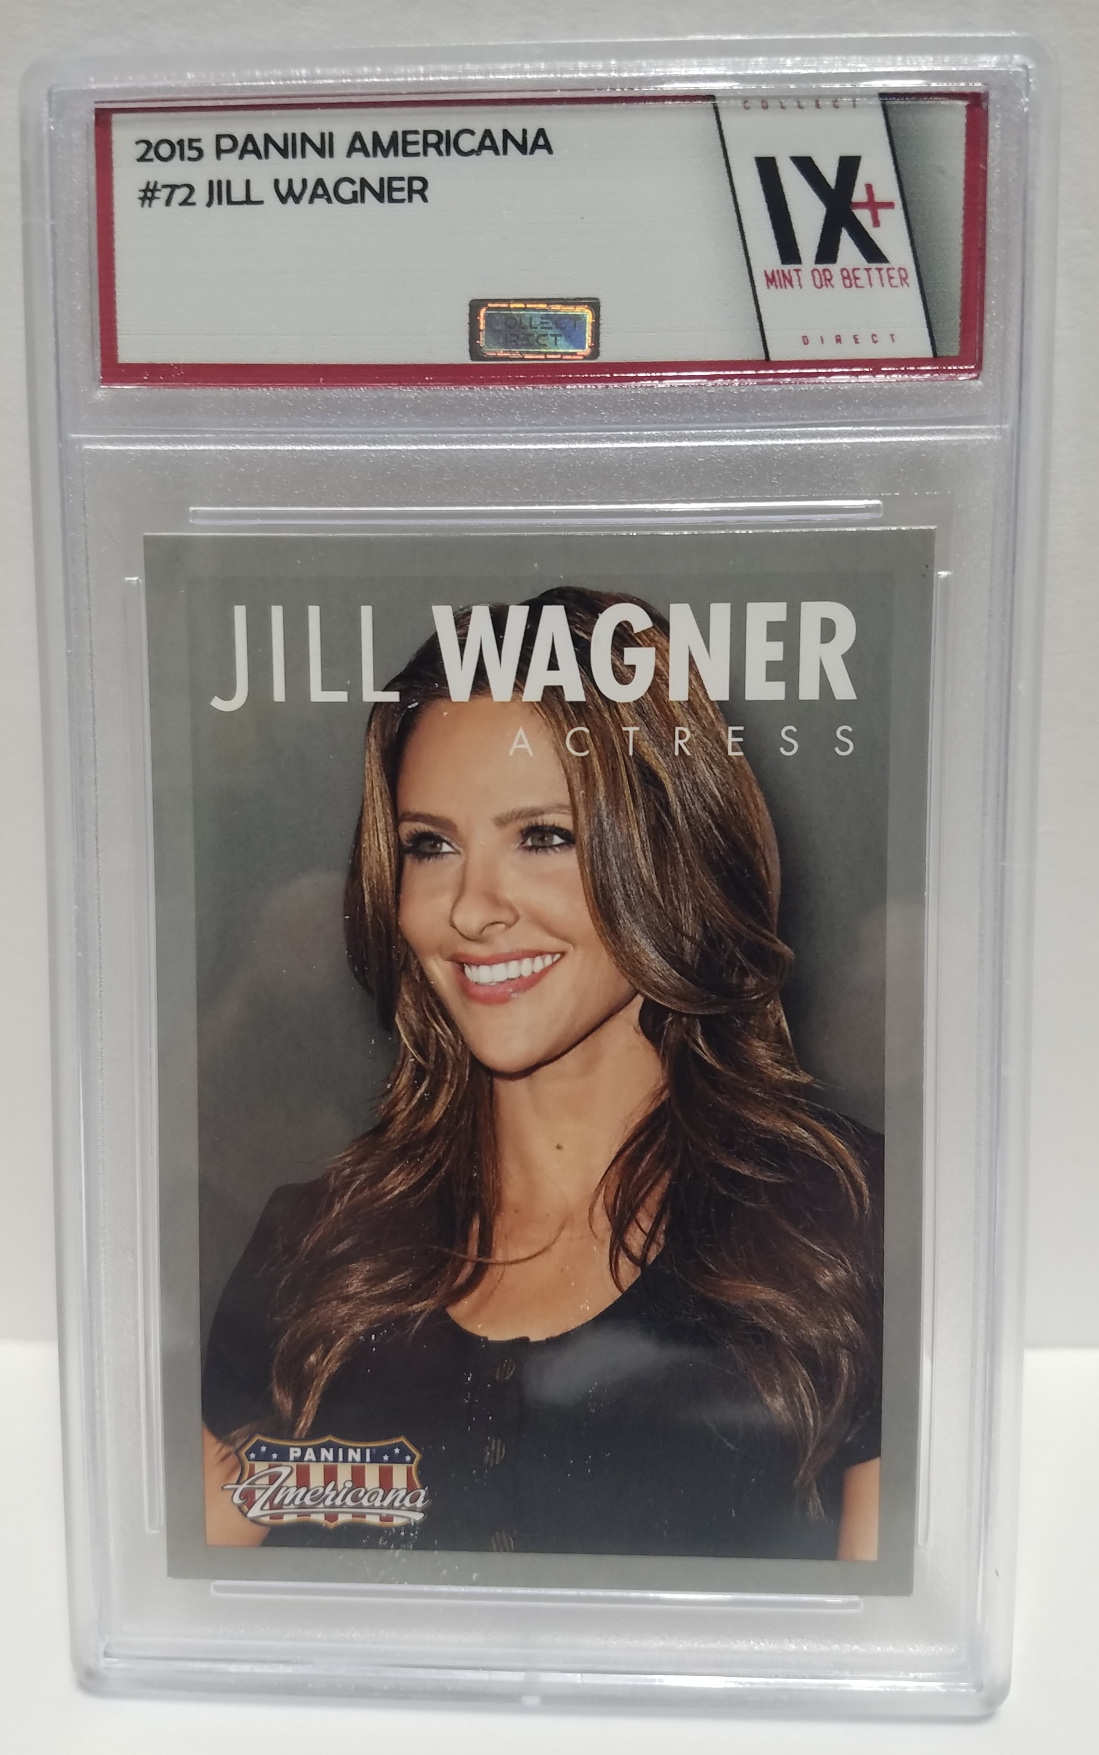 JILL WAGNER 2015 Panini Americana #72 Collect Direct Graded Mint or Better Actress BLADE